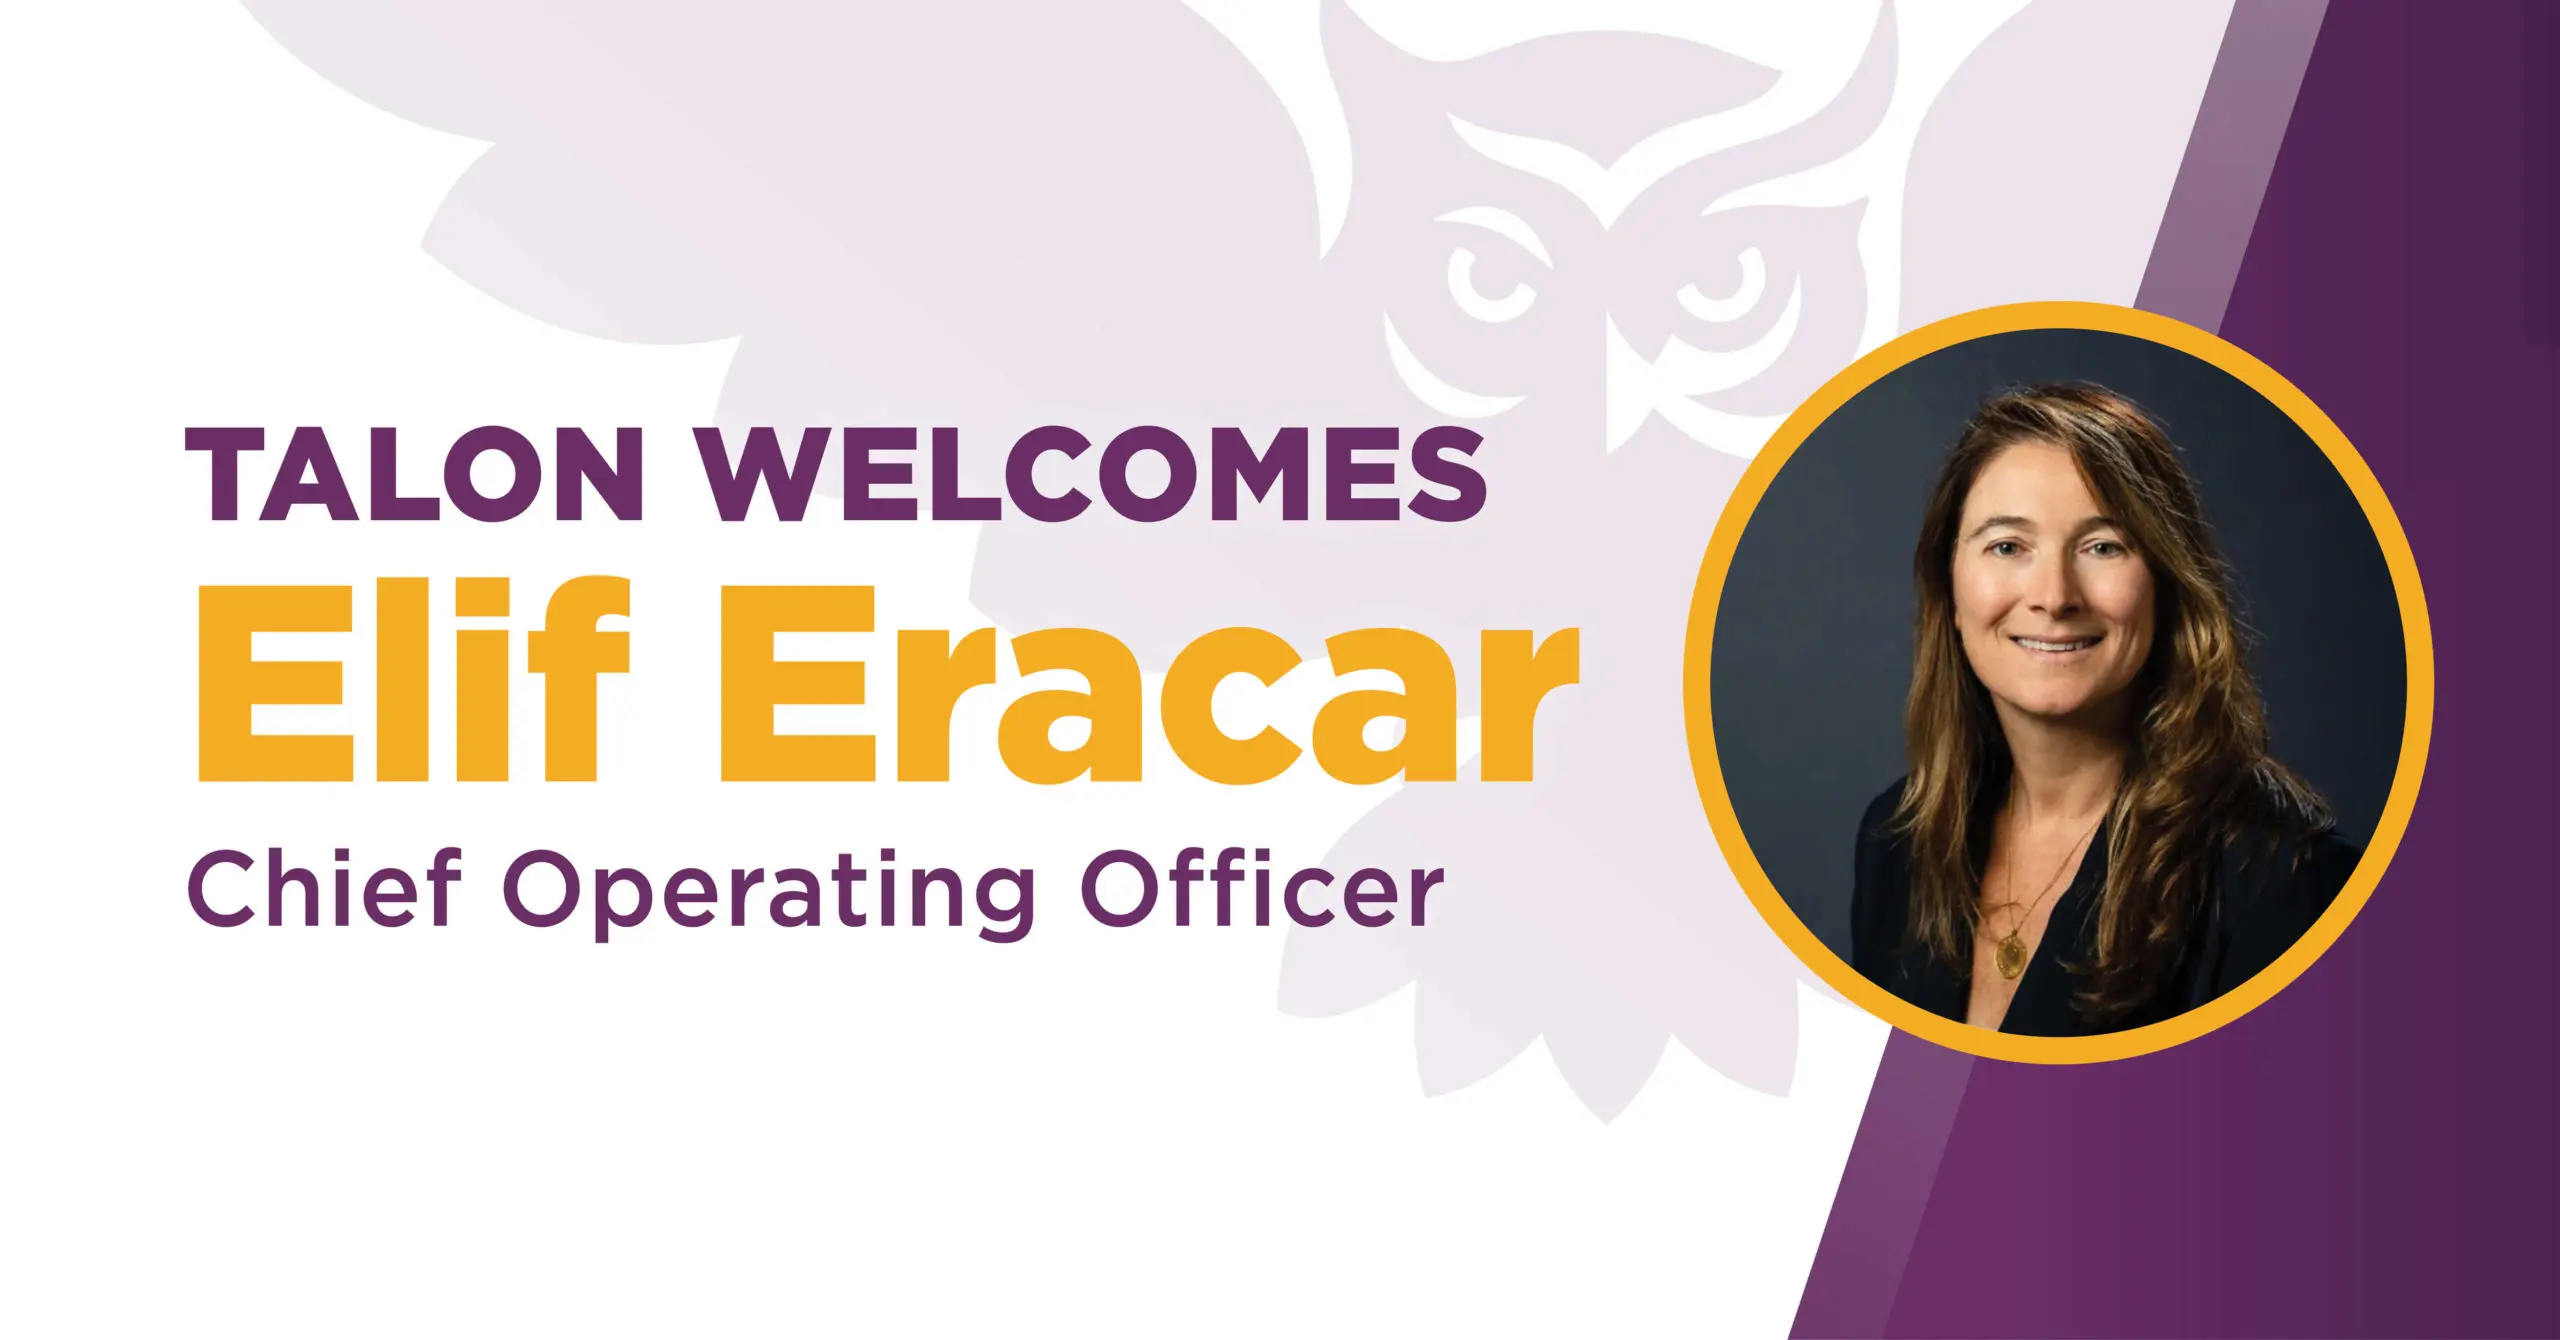 Talon welcomes Elif Eracar Chief Operating Officer